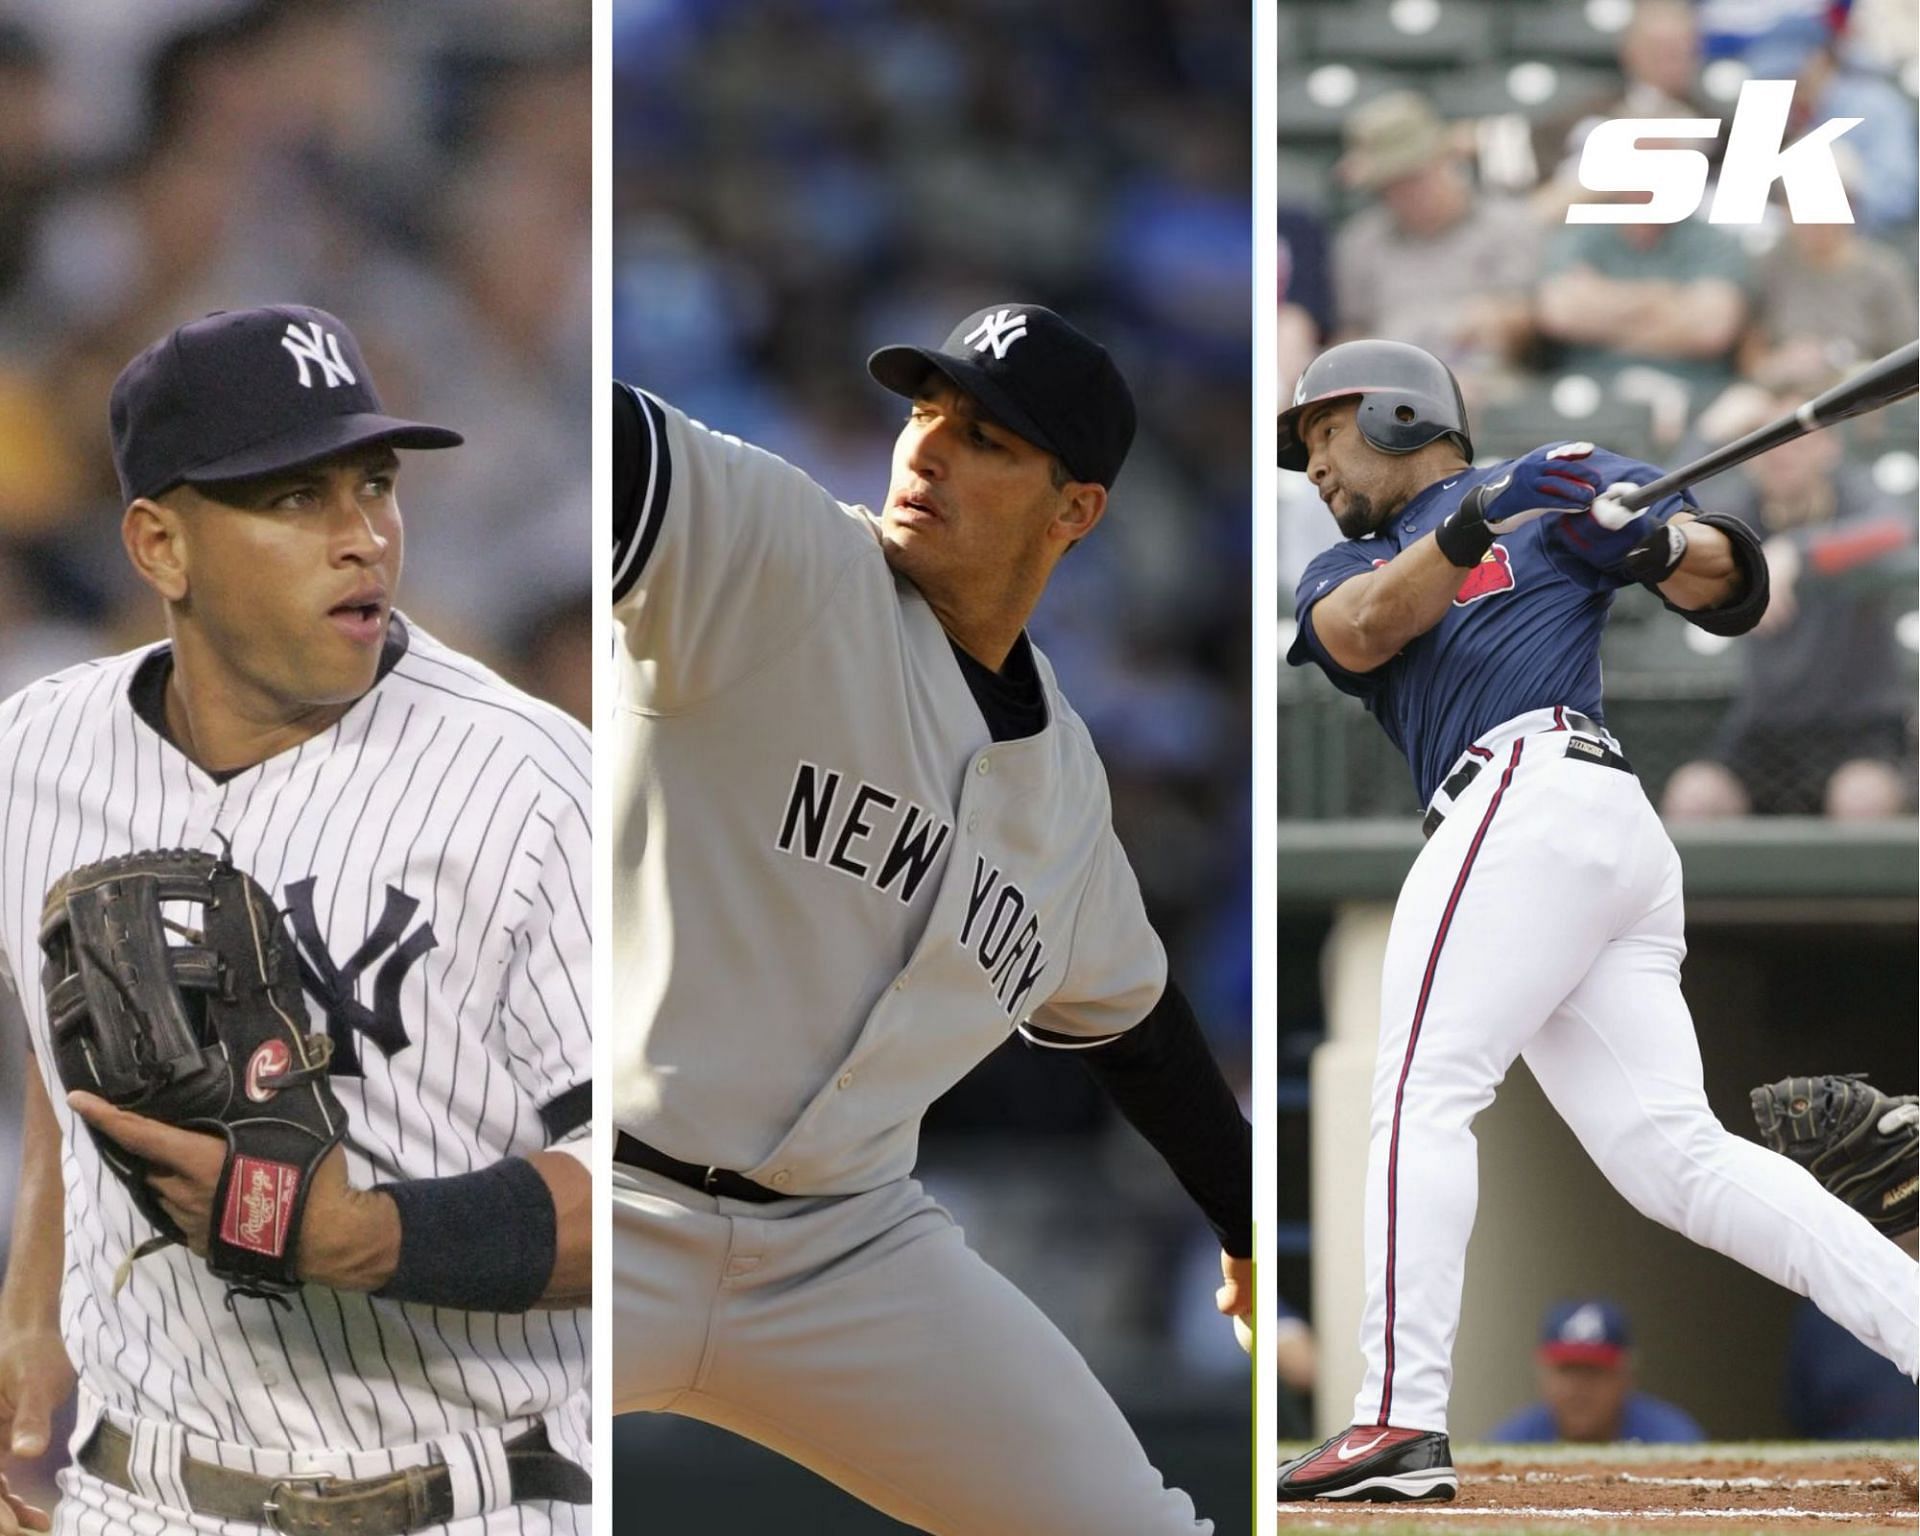 Alex Rodriguez, Andy Pettitte and Gary Sheffield all feature on the 2023 Hall of Fame ballot despite their history of PED use